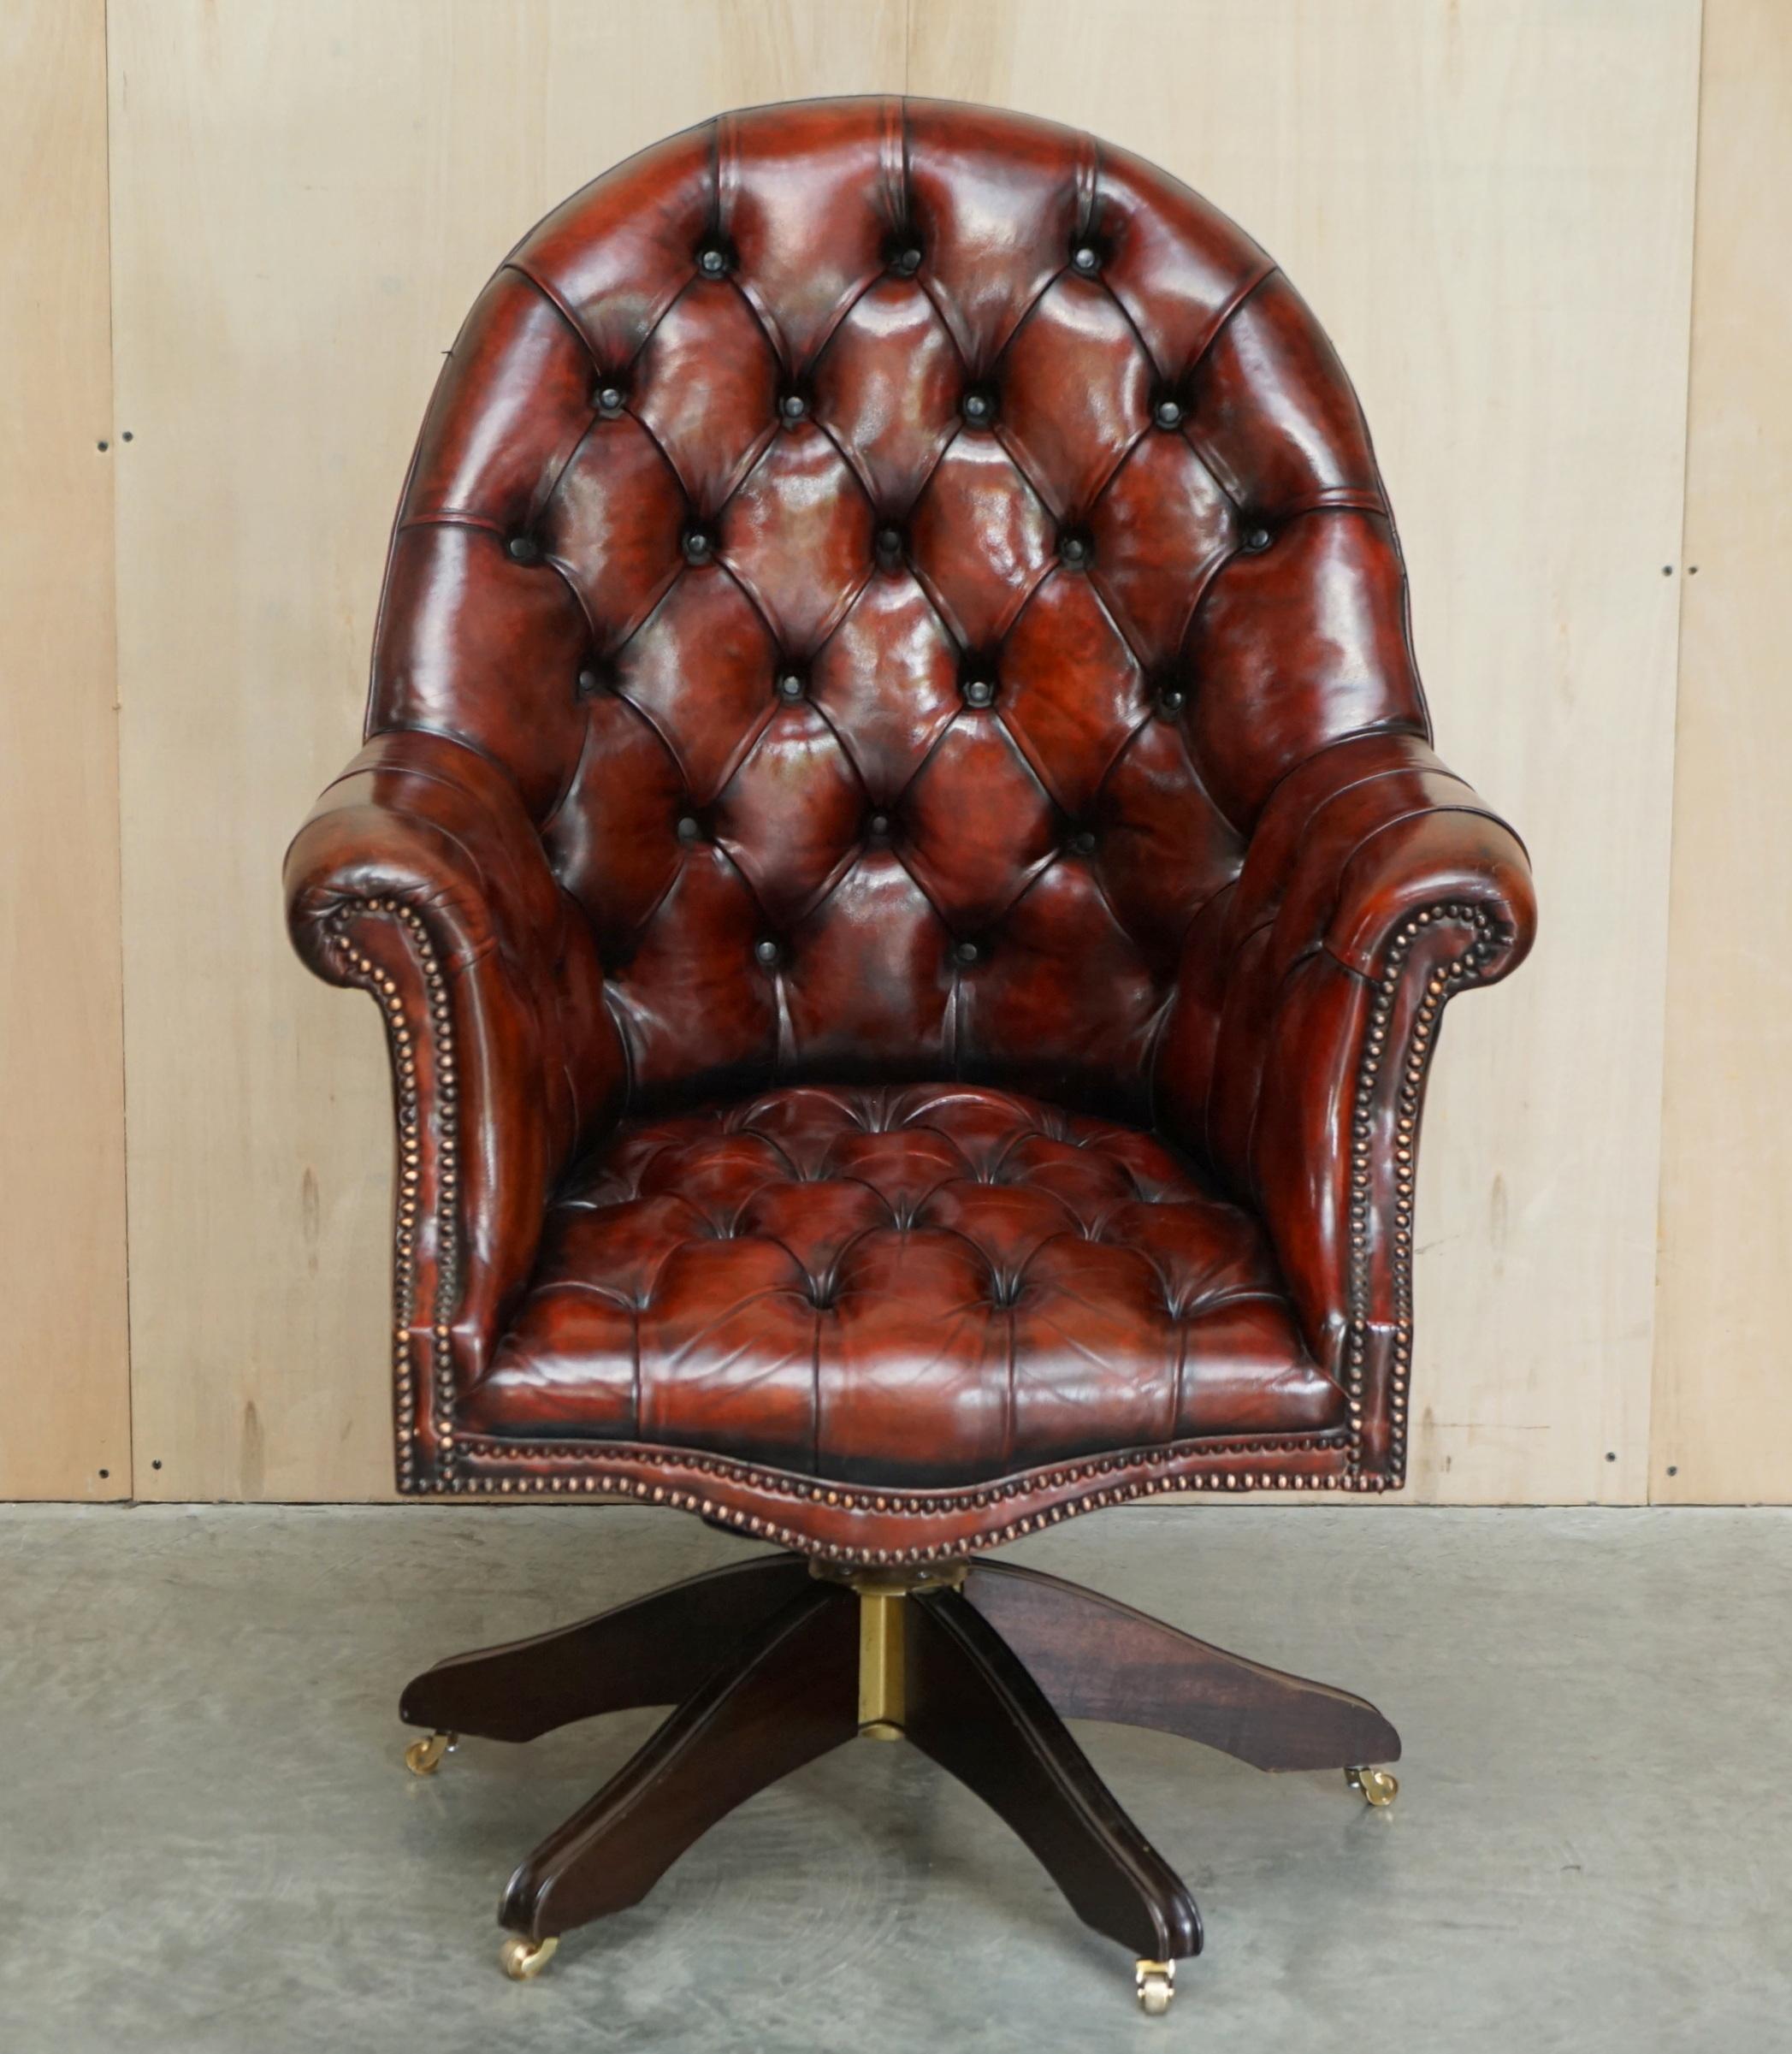 Royal House Antiques

Royal House Antiques is delighted to offer for sale this lovely fully restored original oak framed Antique circa 1900 hand dyed Chesterfield cigar brown leather directors chair.

Please note the delivery fee listed is just a